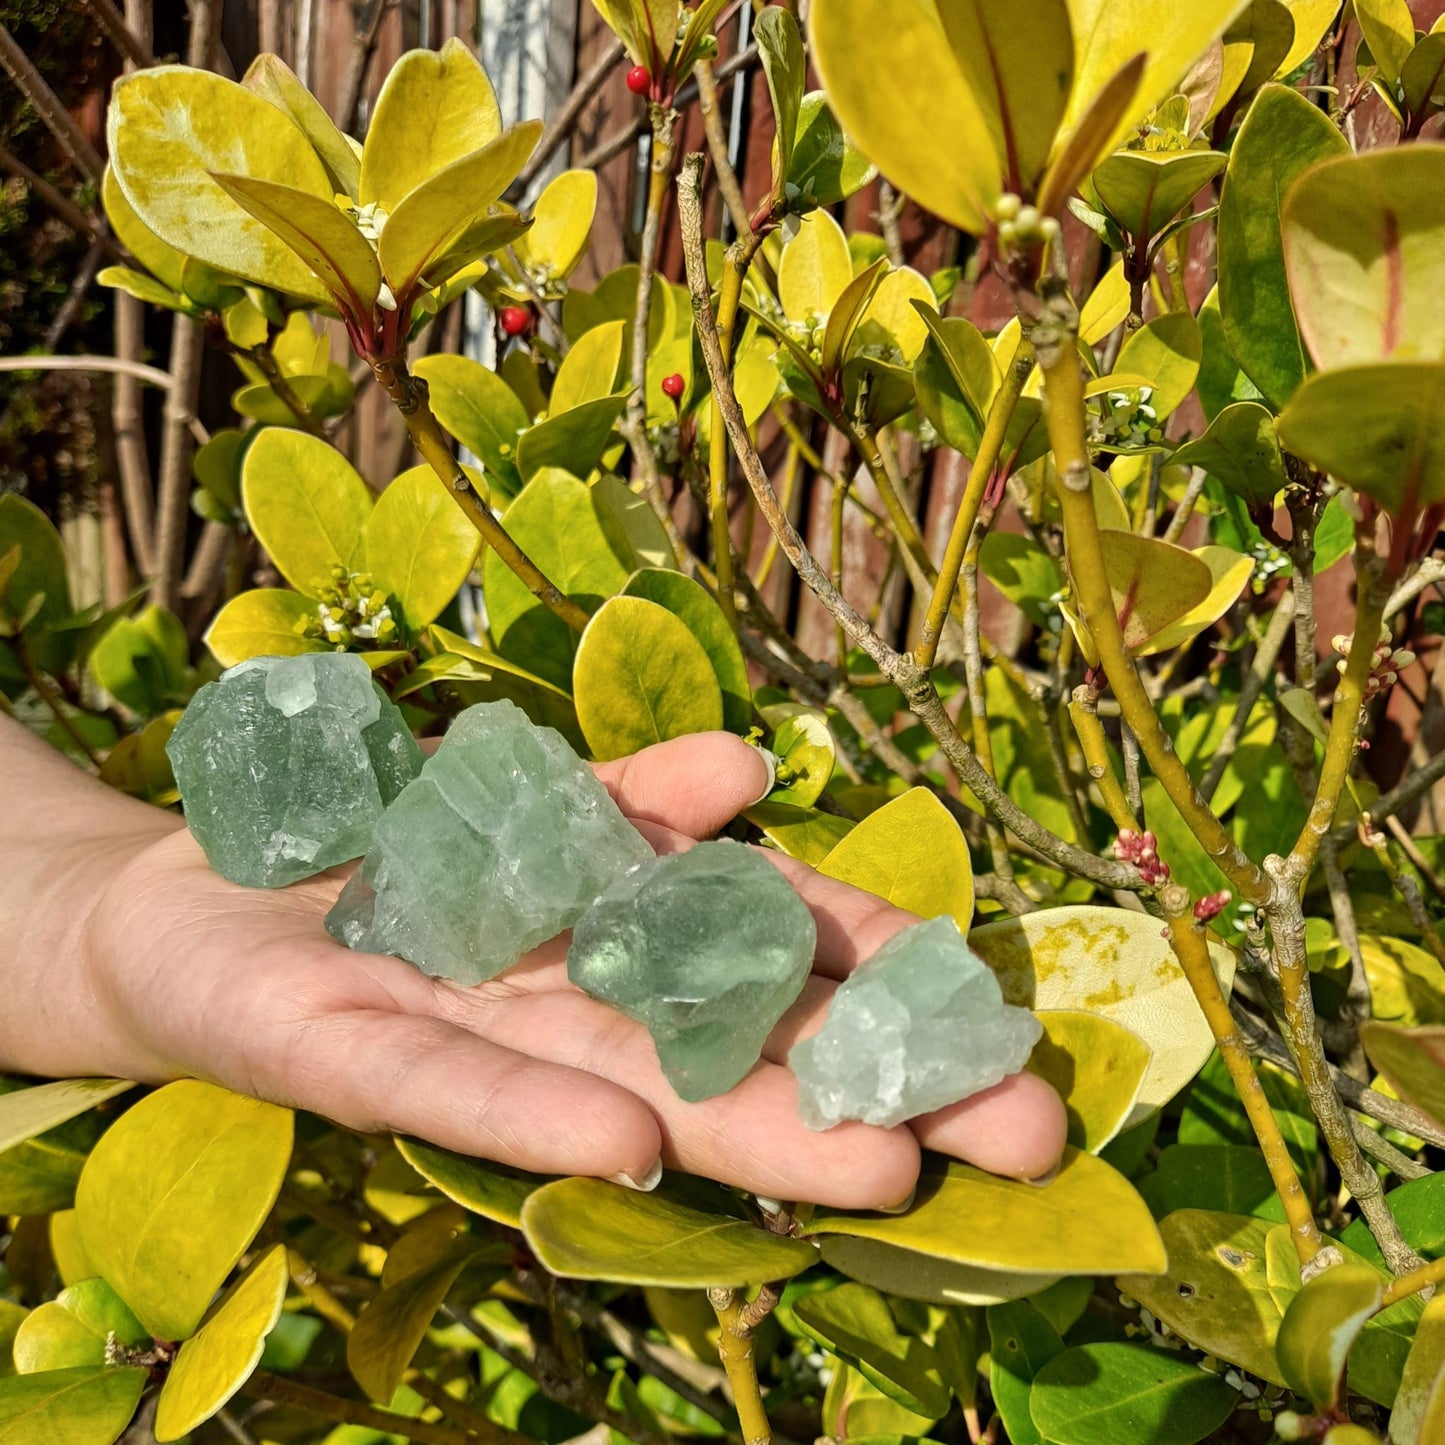 green fluorite rough stone crystal dumiscrystals